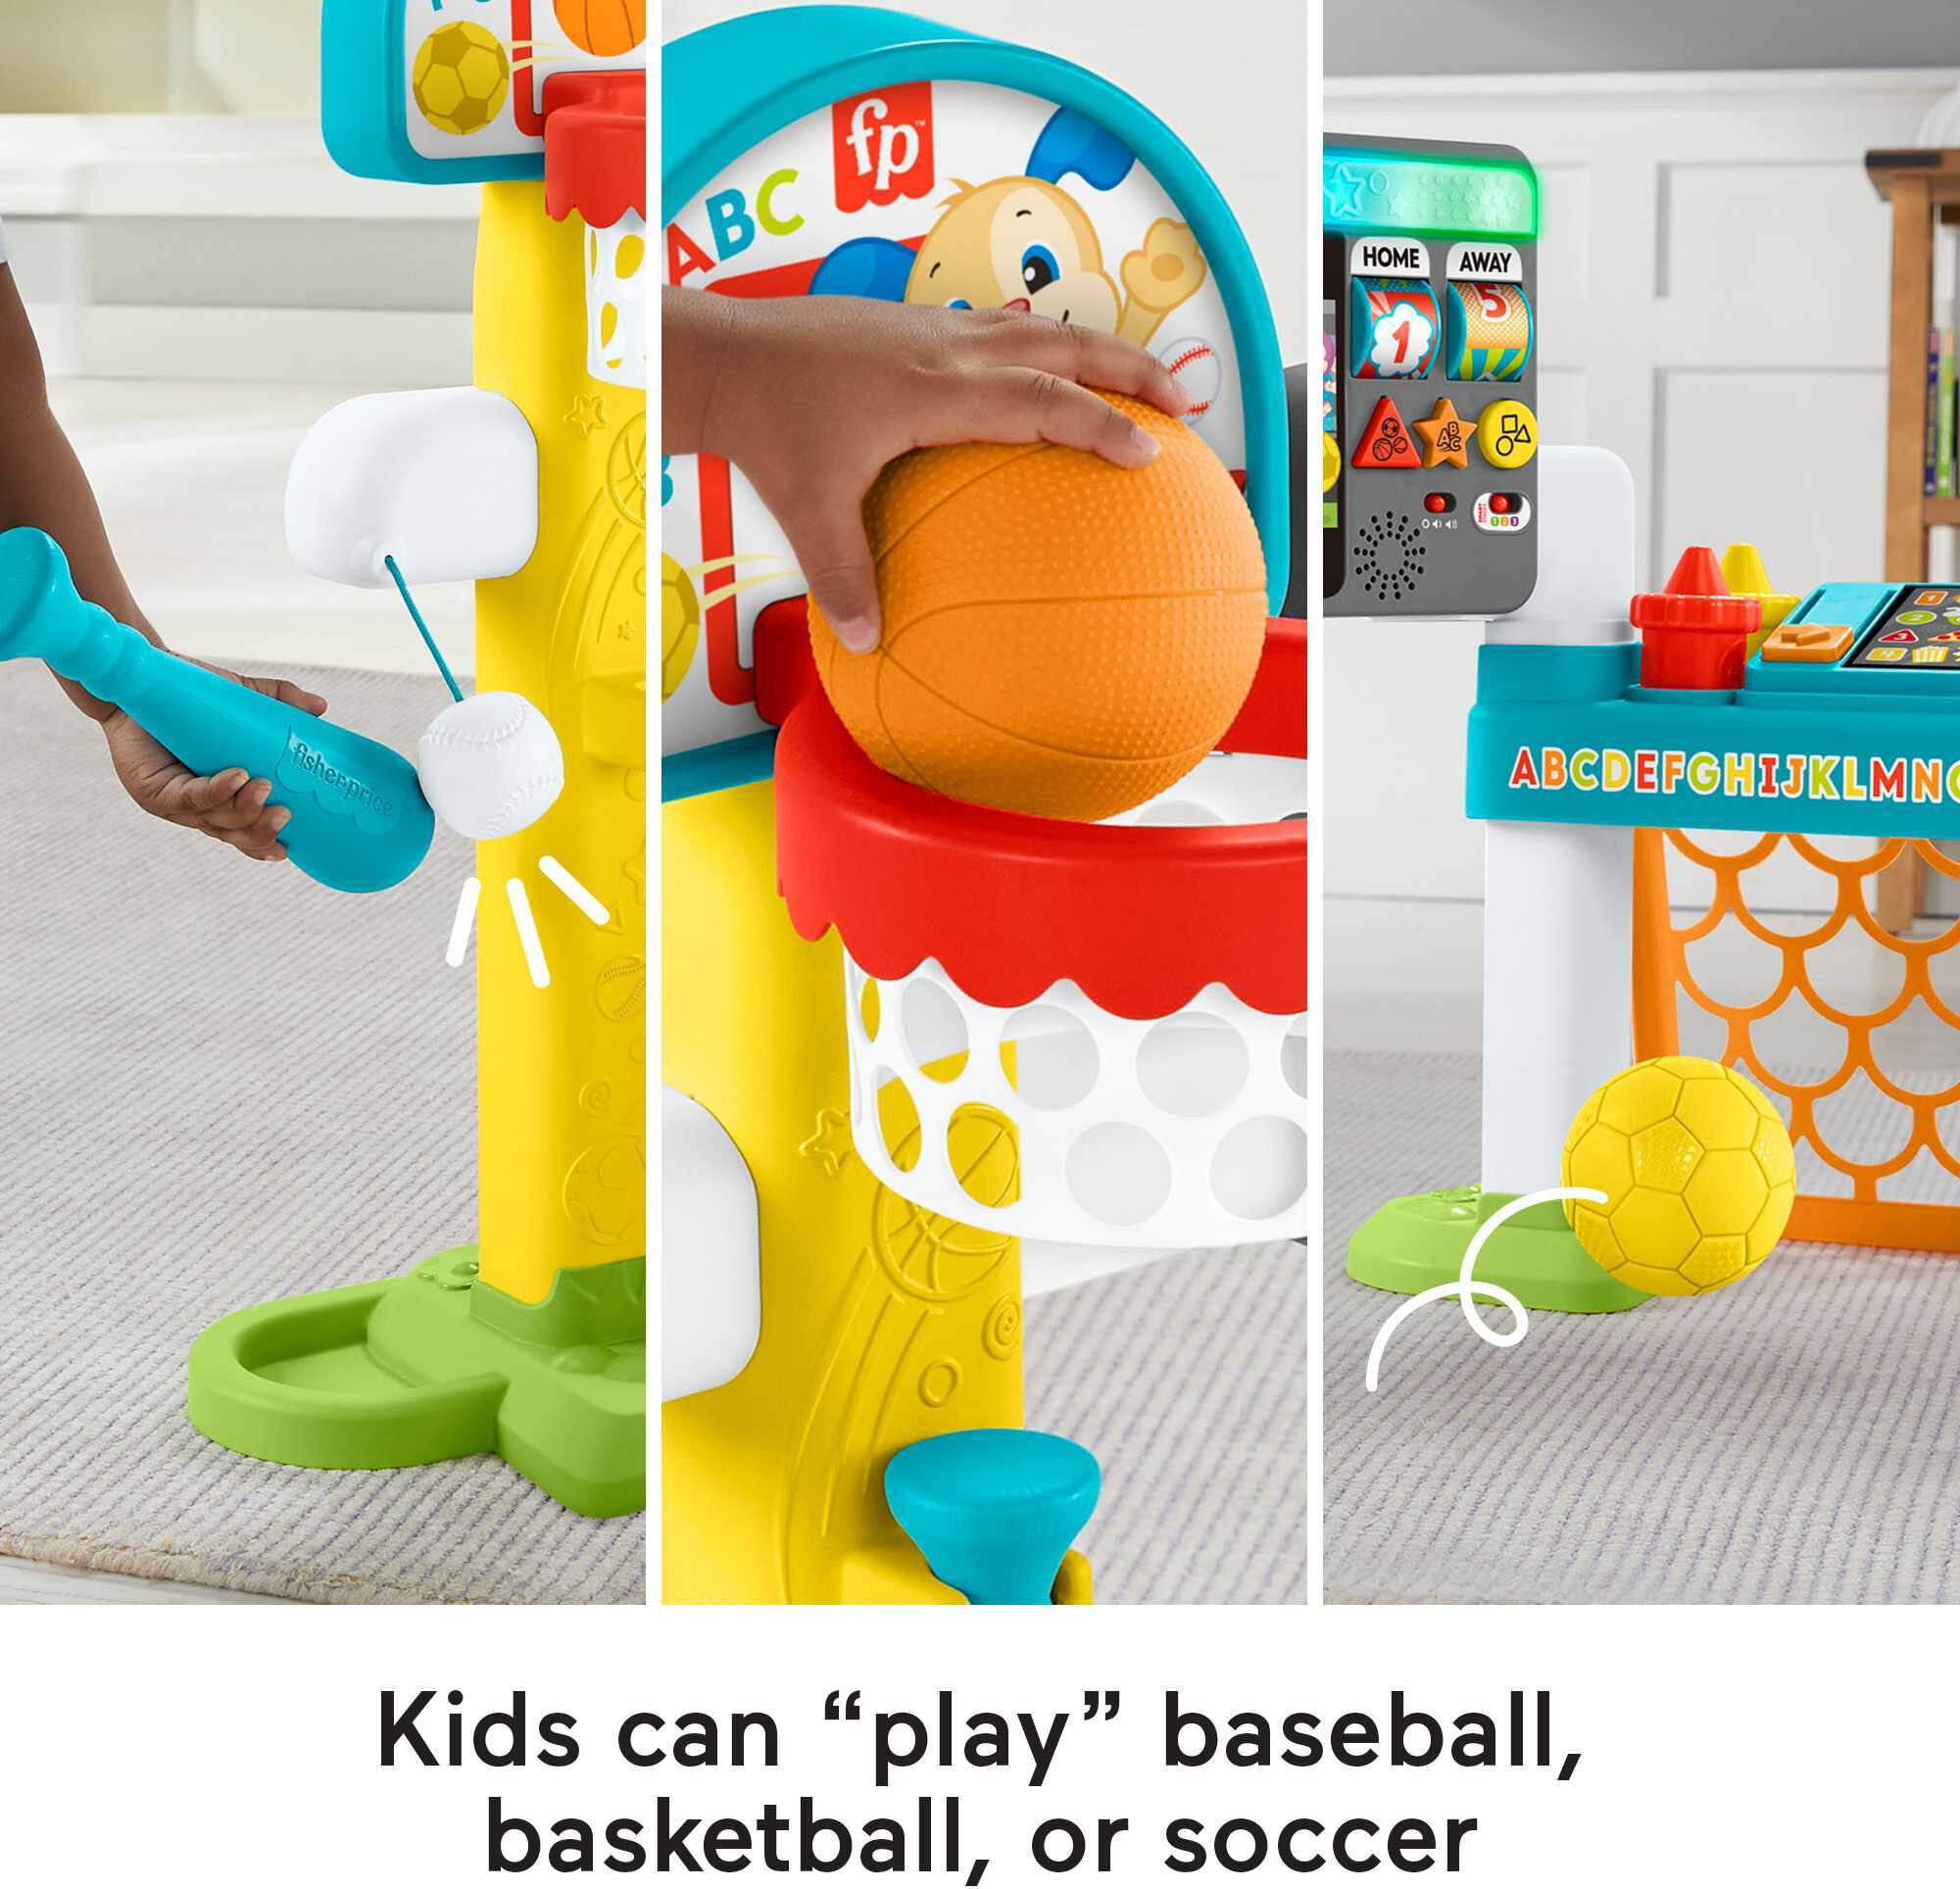 Fisher-Price Laugh & Learn 4-in-1 Game Experience Sports Activity Center & Toddler Learning Toy - image 4 of 7